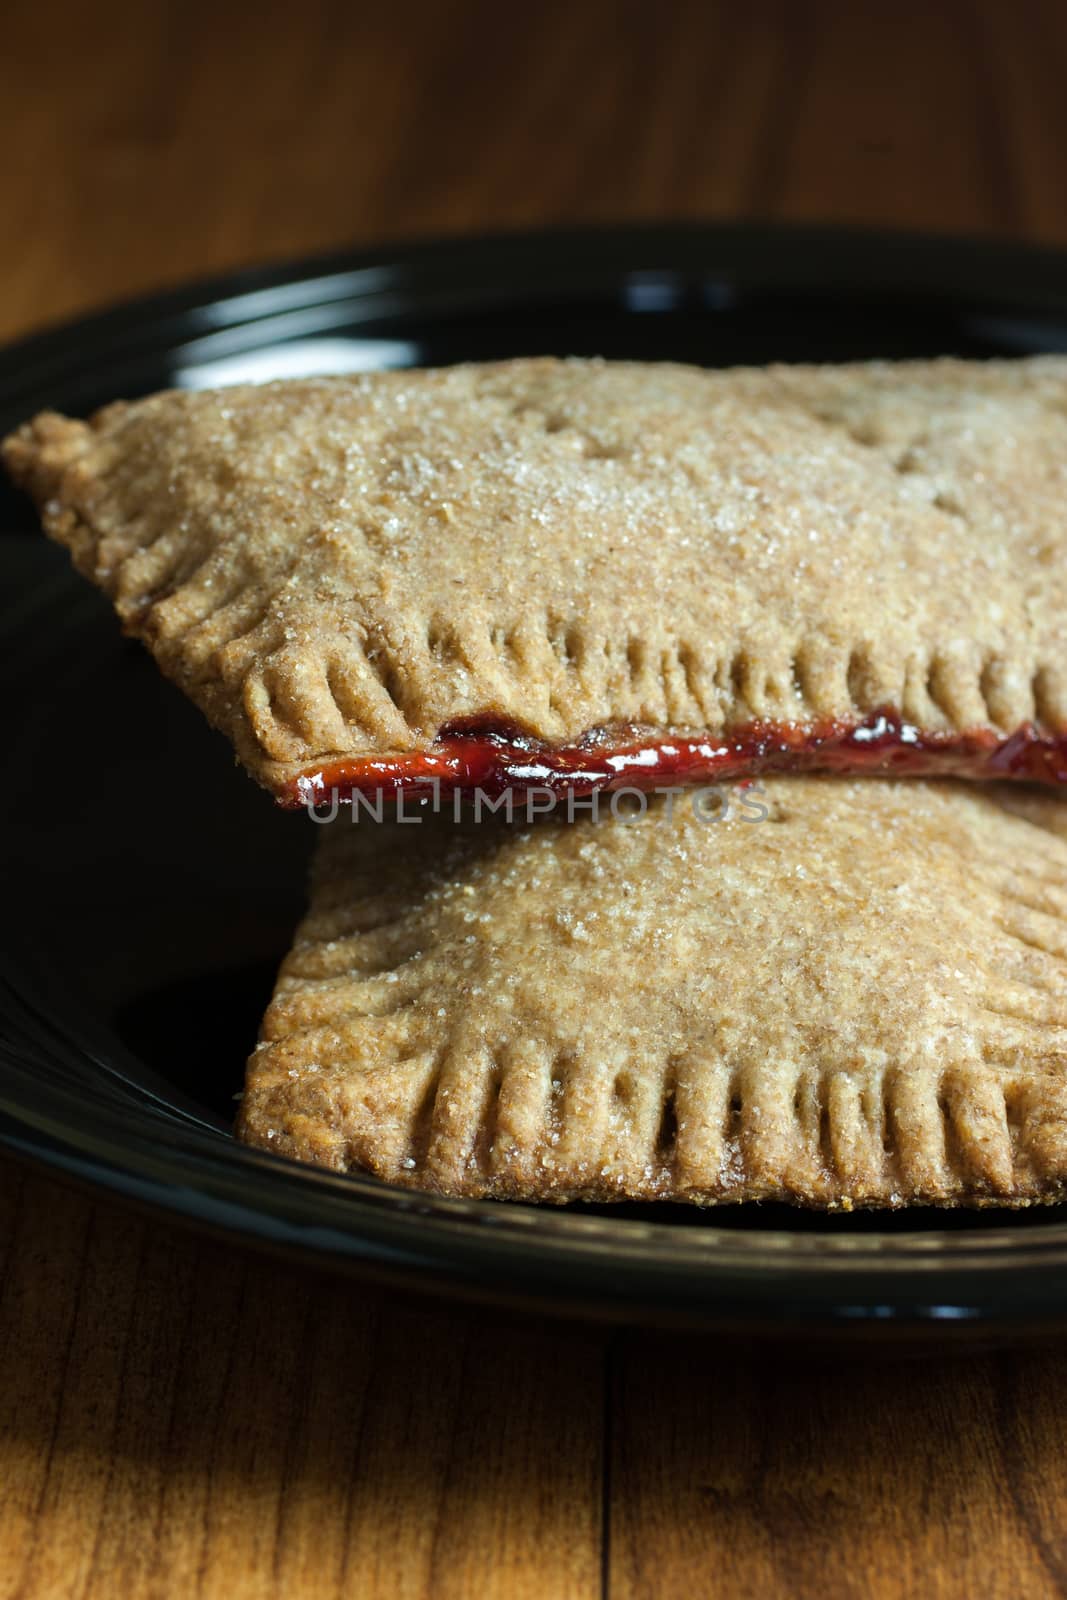 Whole wheat toaster pastries, lightly dusted with sugar crystals and filled with raspberry filling.